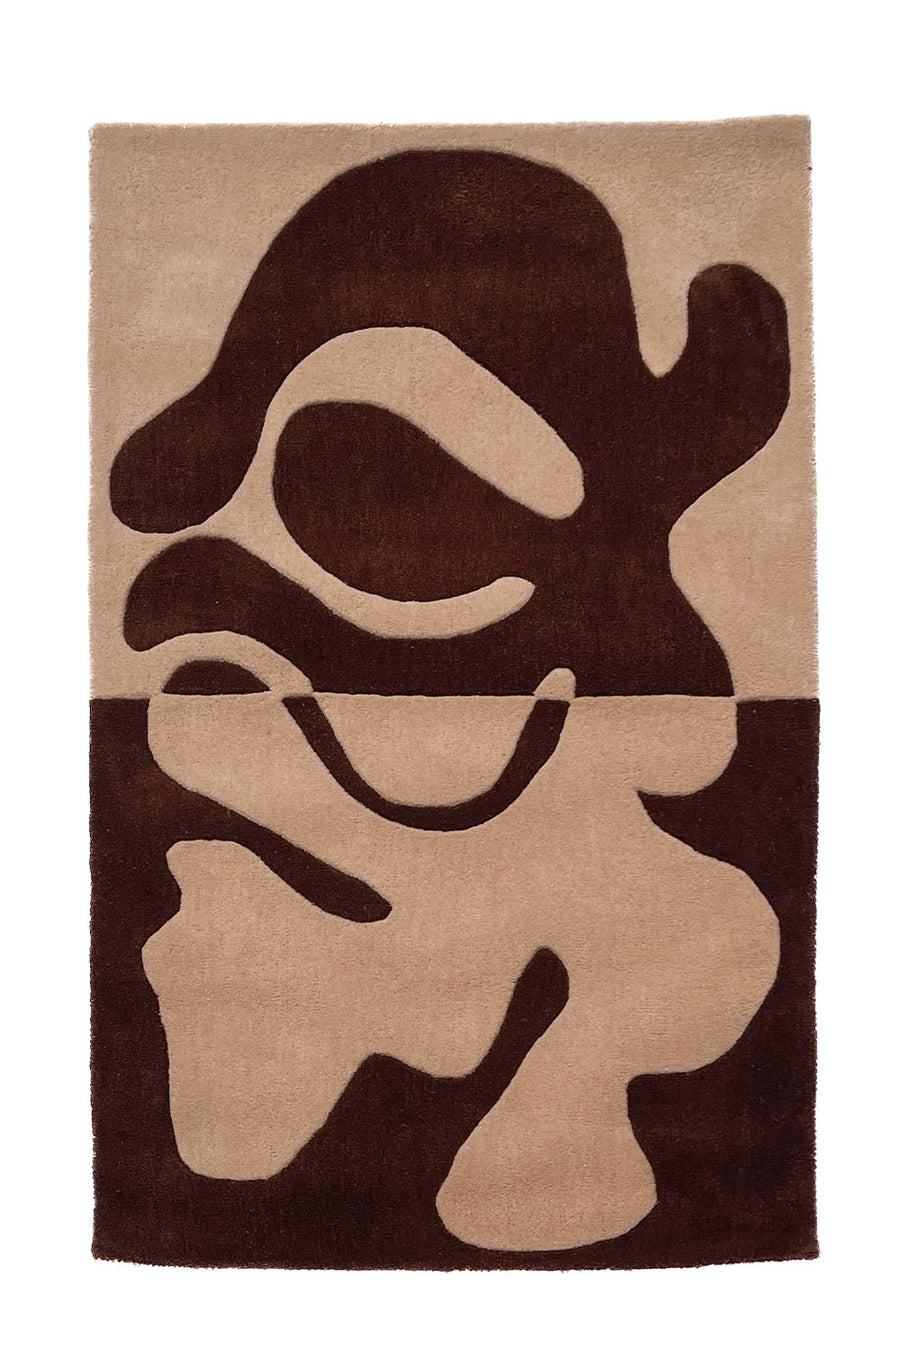 Organic Fusion Hand Tufted Wool Rug in Brown by Jubi